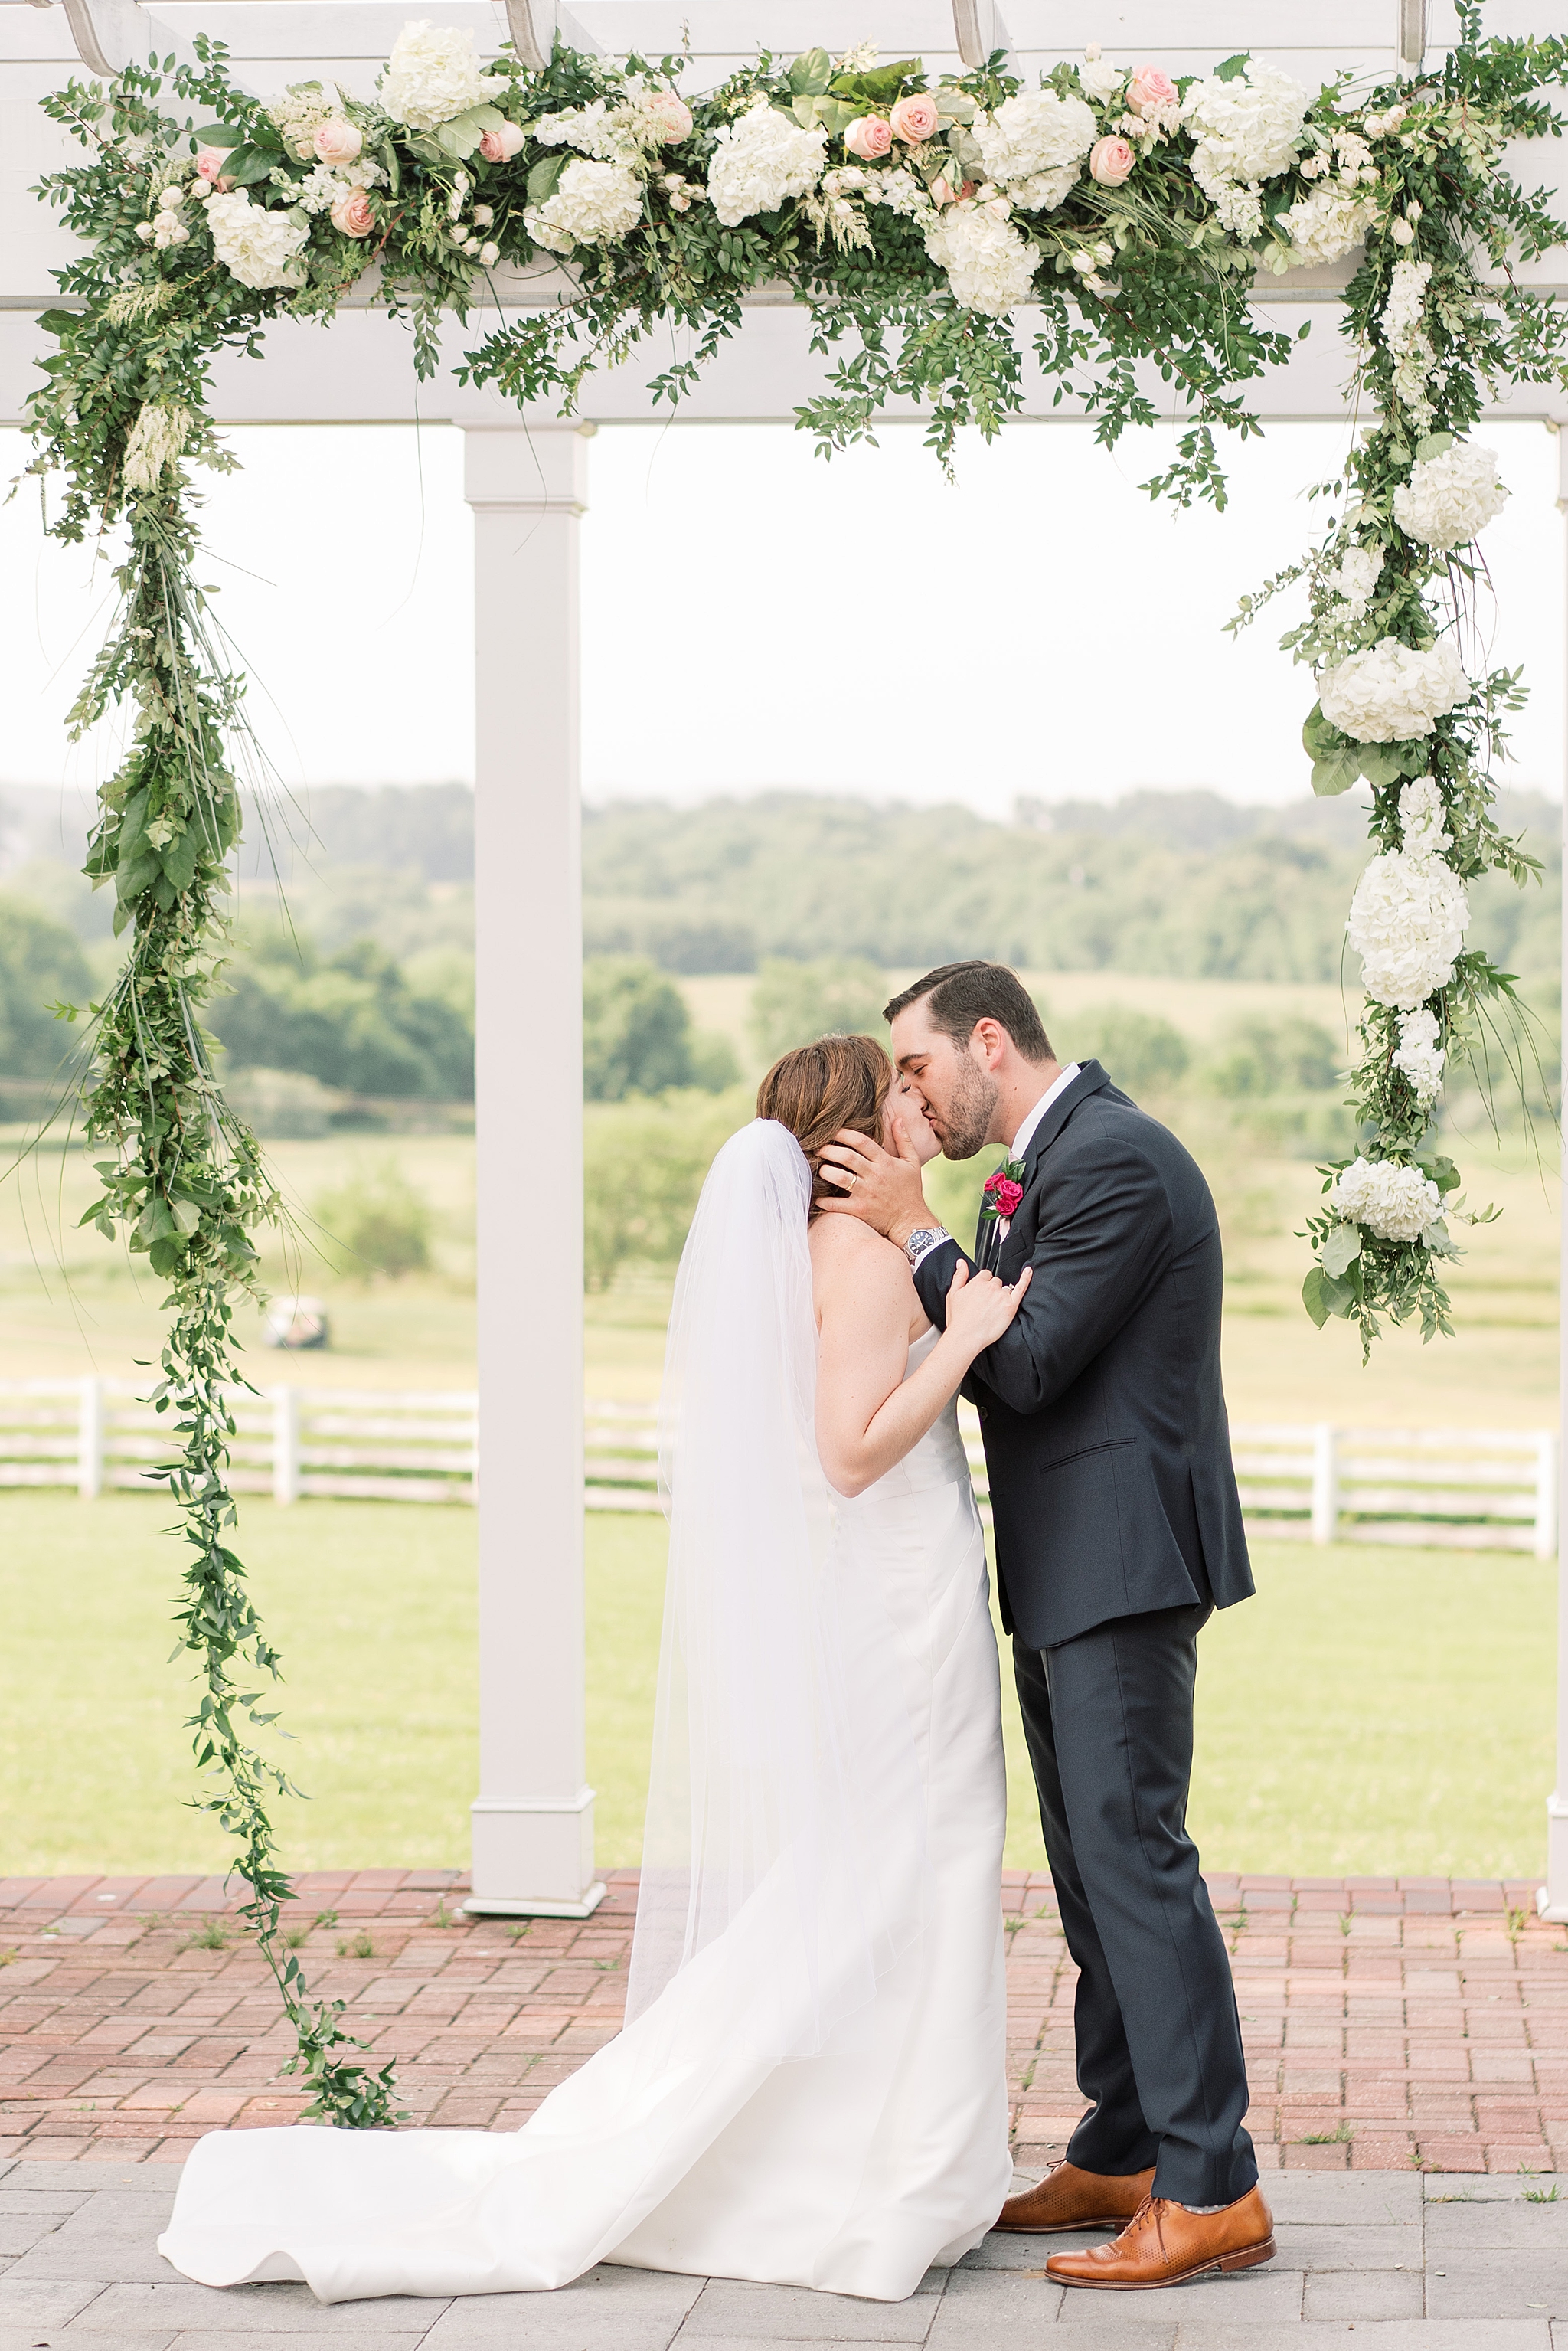 A summer wedding at Raspberry Plain Manor in Leesburg, VA  featuring a cream and gold color palette with pops of greenery. 